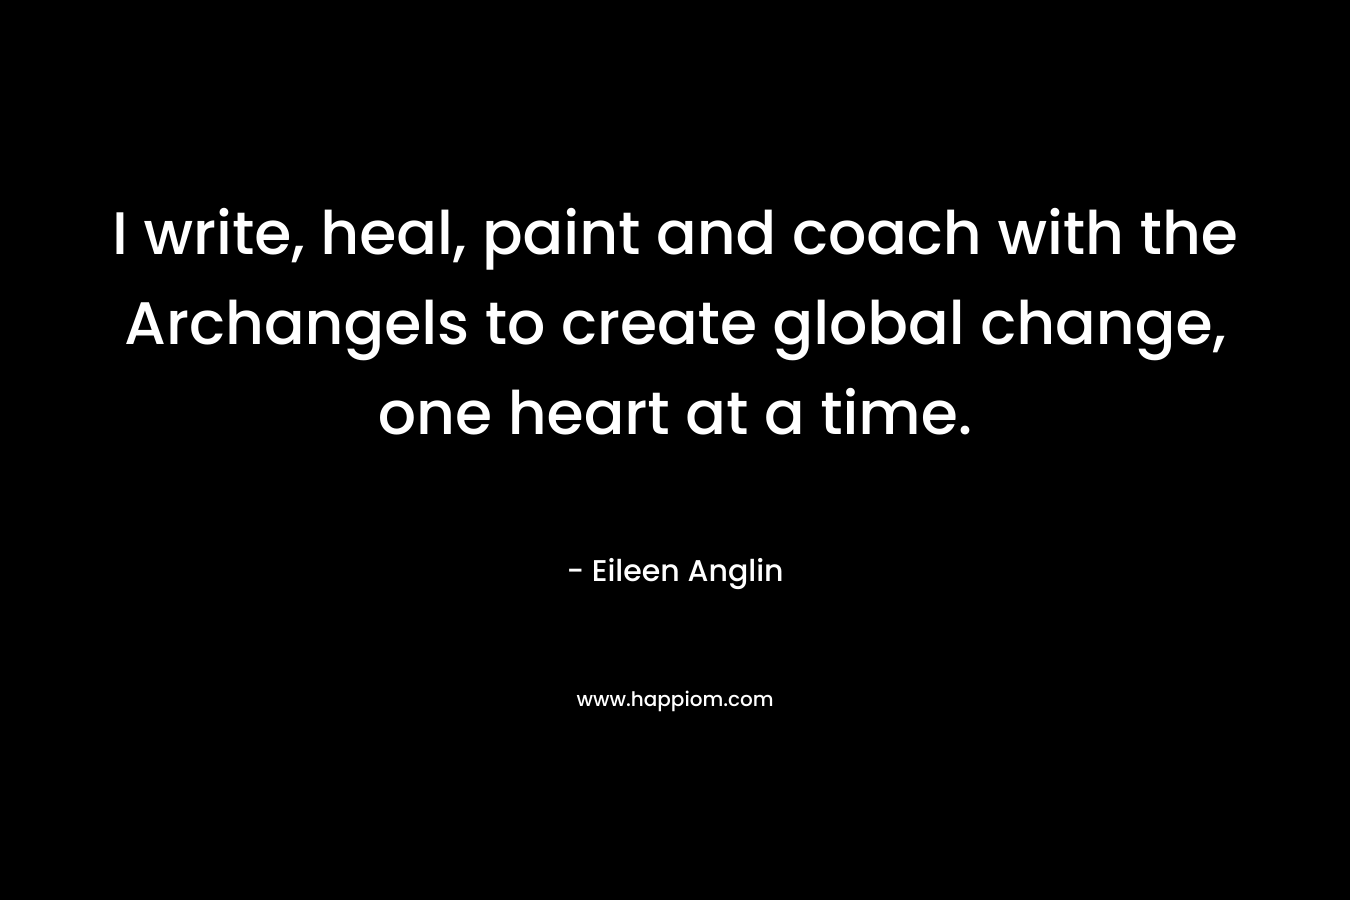 I write, heal, paint and coach with the Archangels to create global change, one heart at a time. – Eileen Anglin